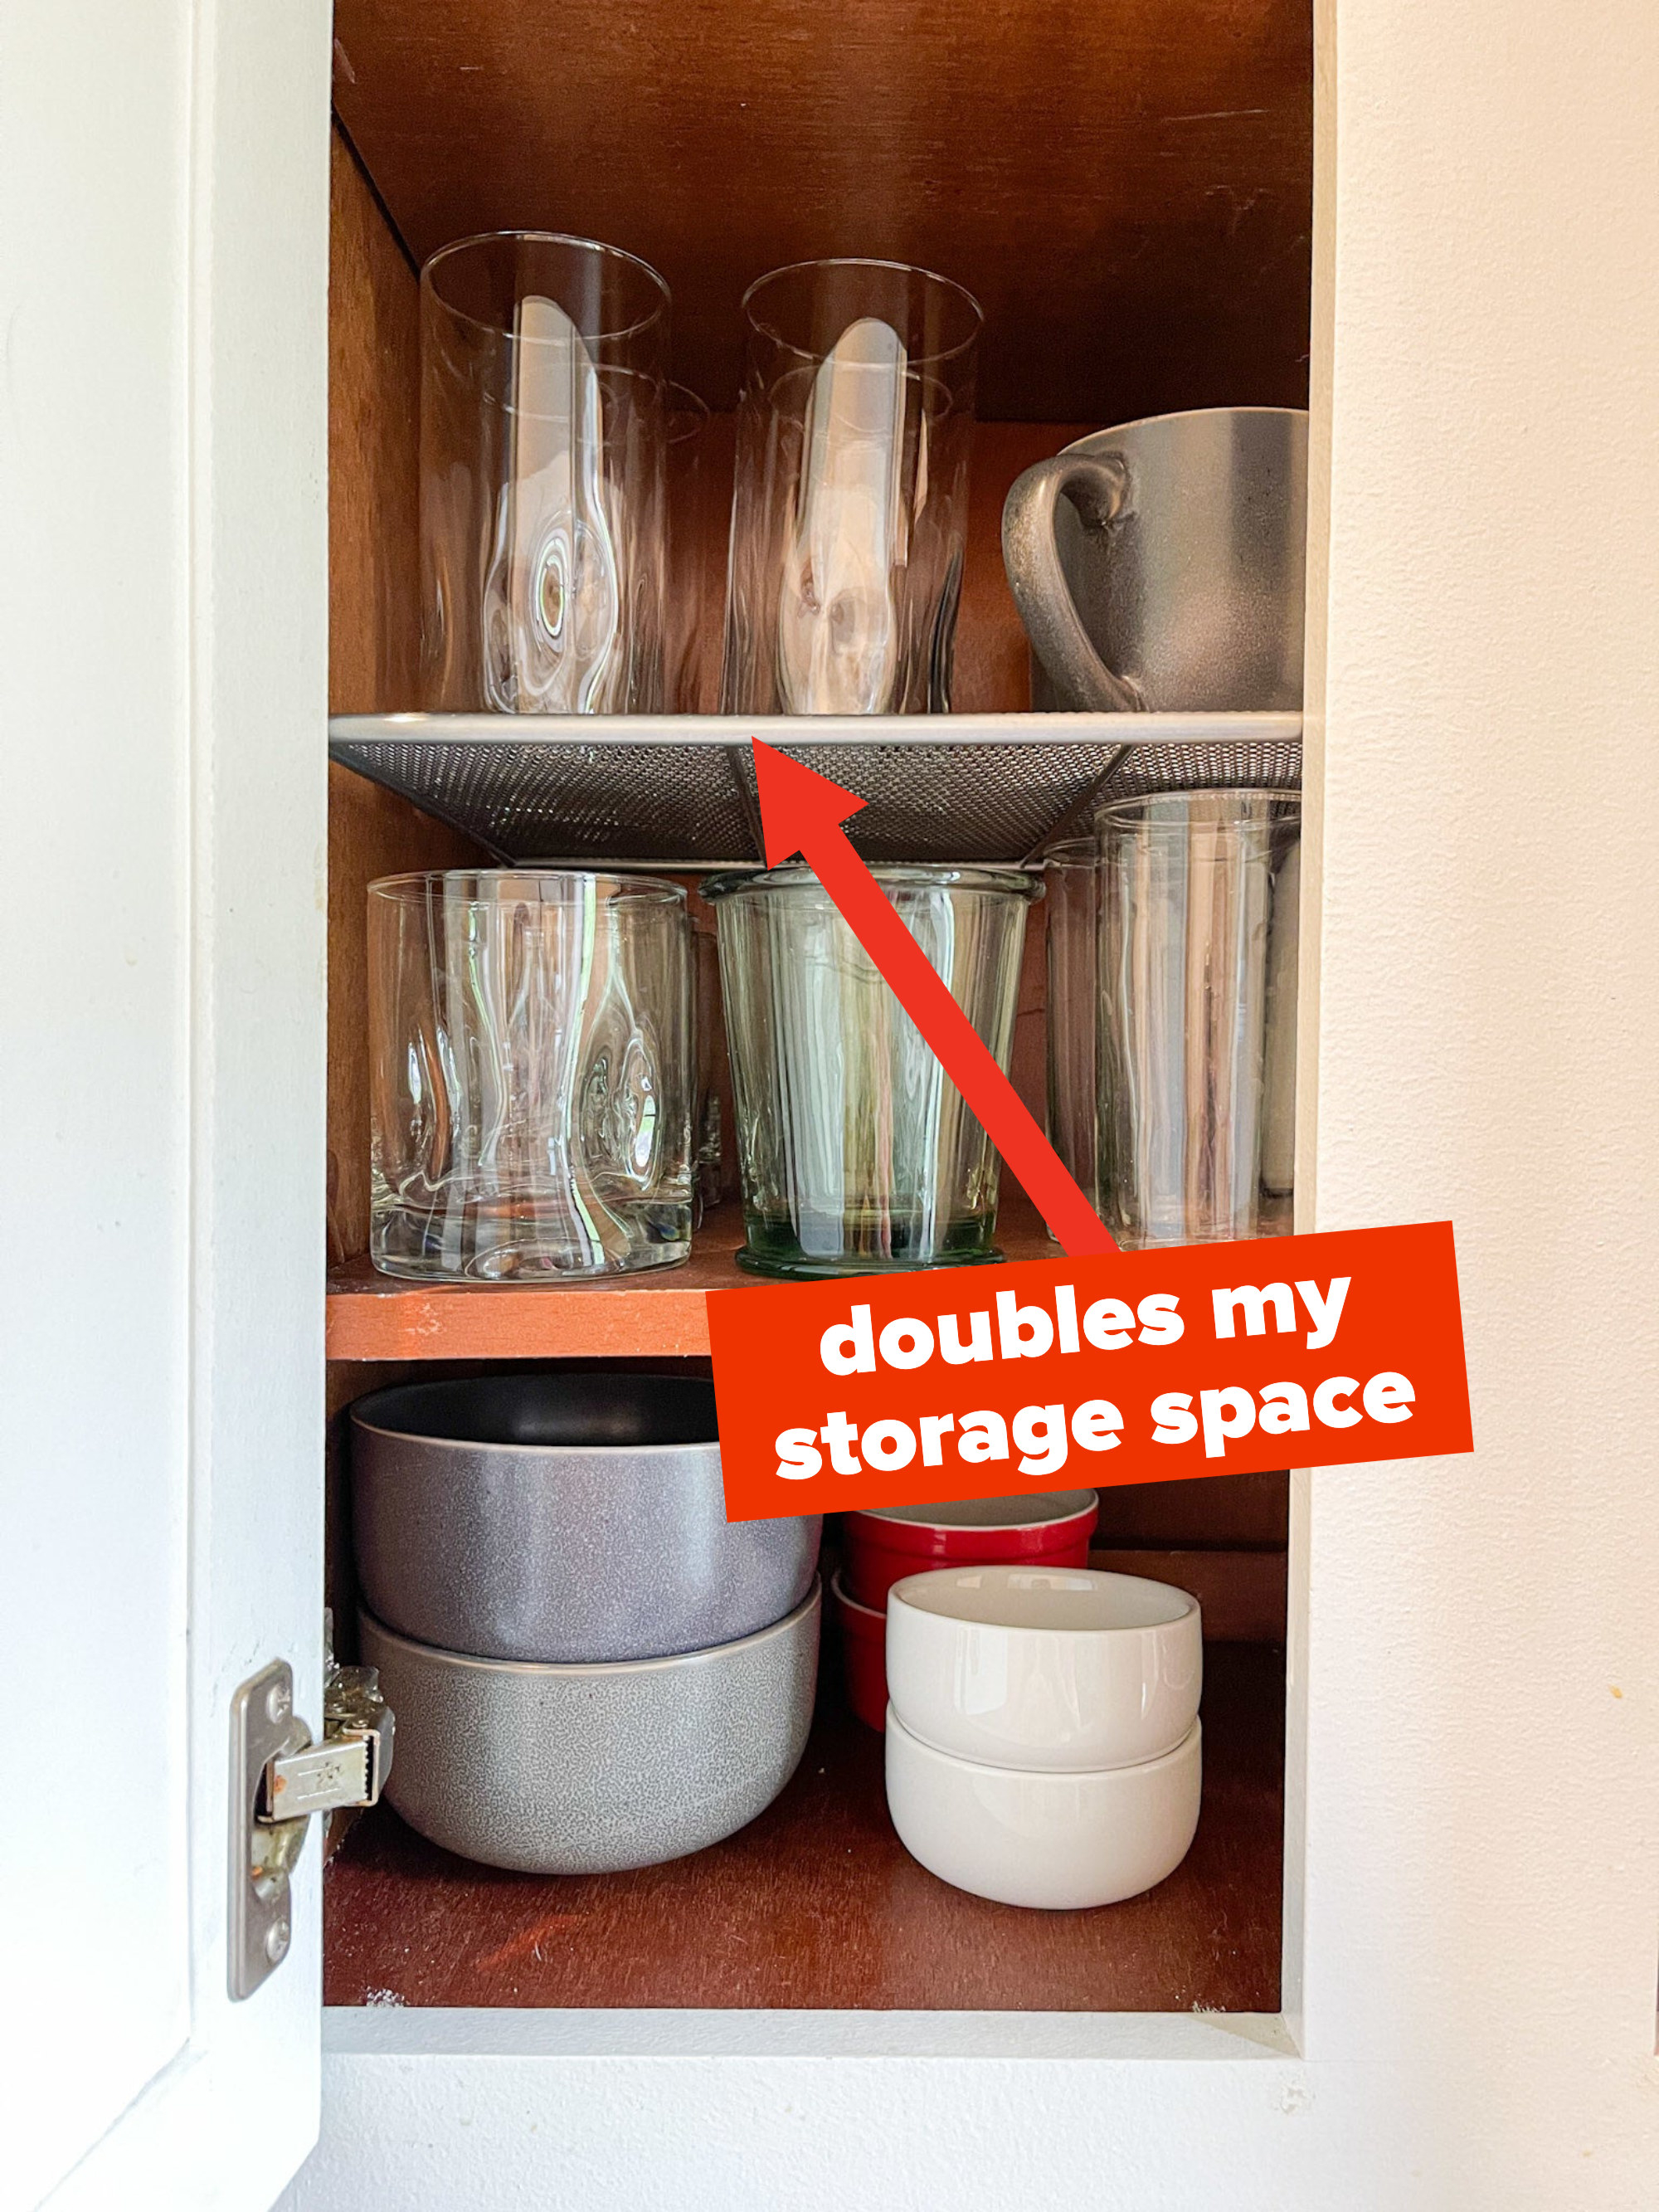 doubling storage space with a wire rack in the cabinet